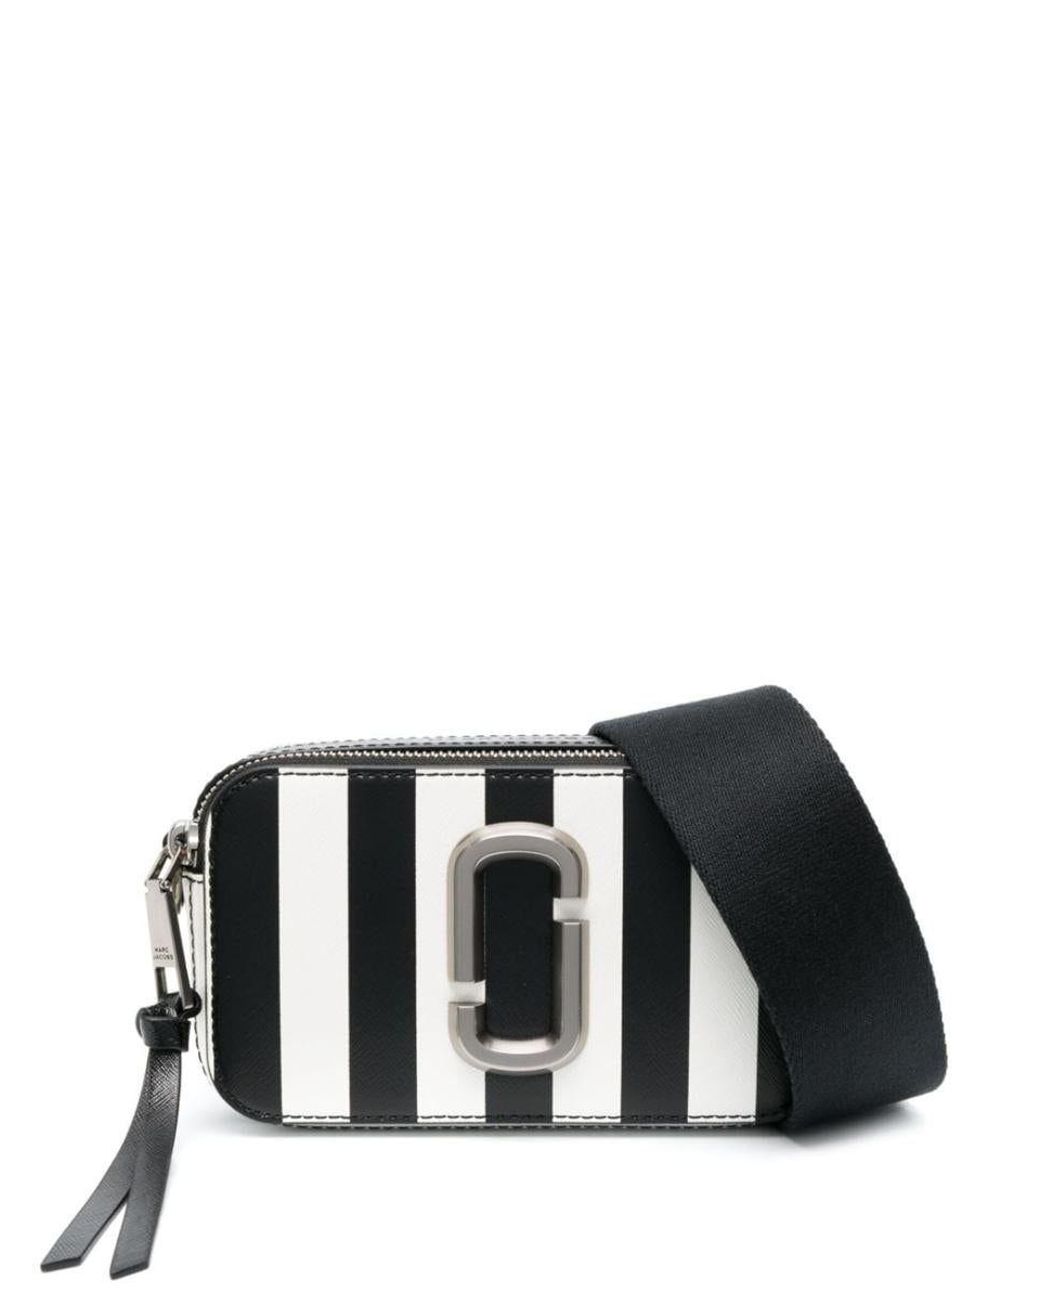 Marc Jacobs The Snapshot Bags in Black